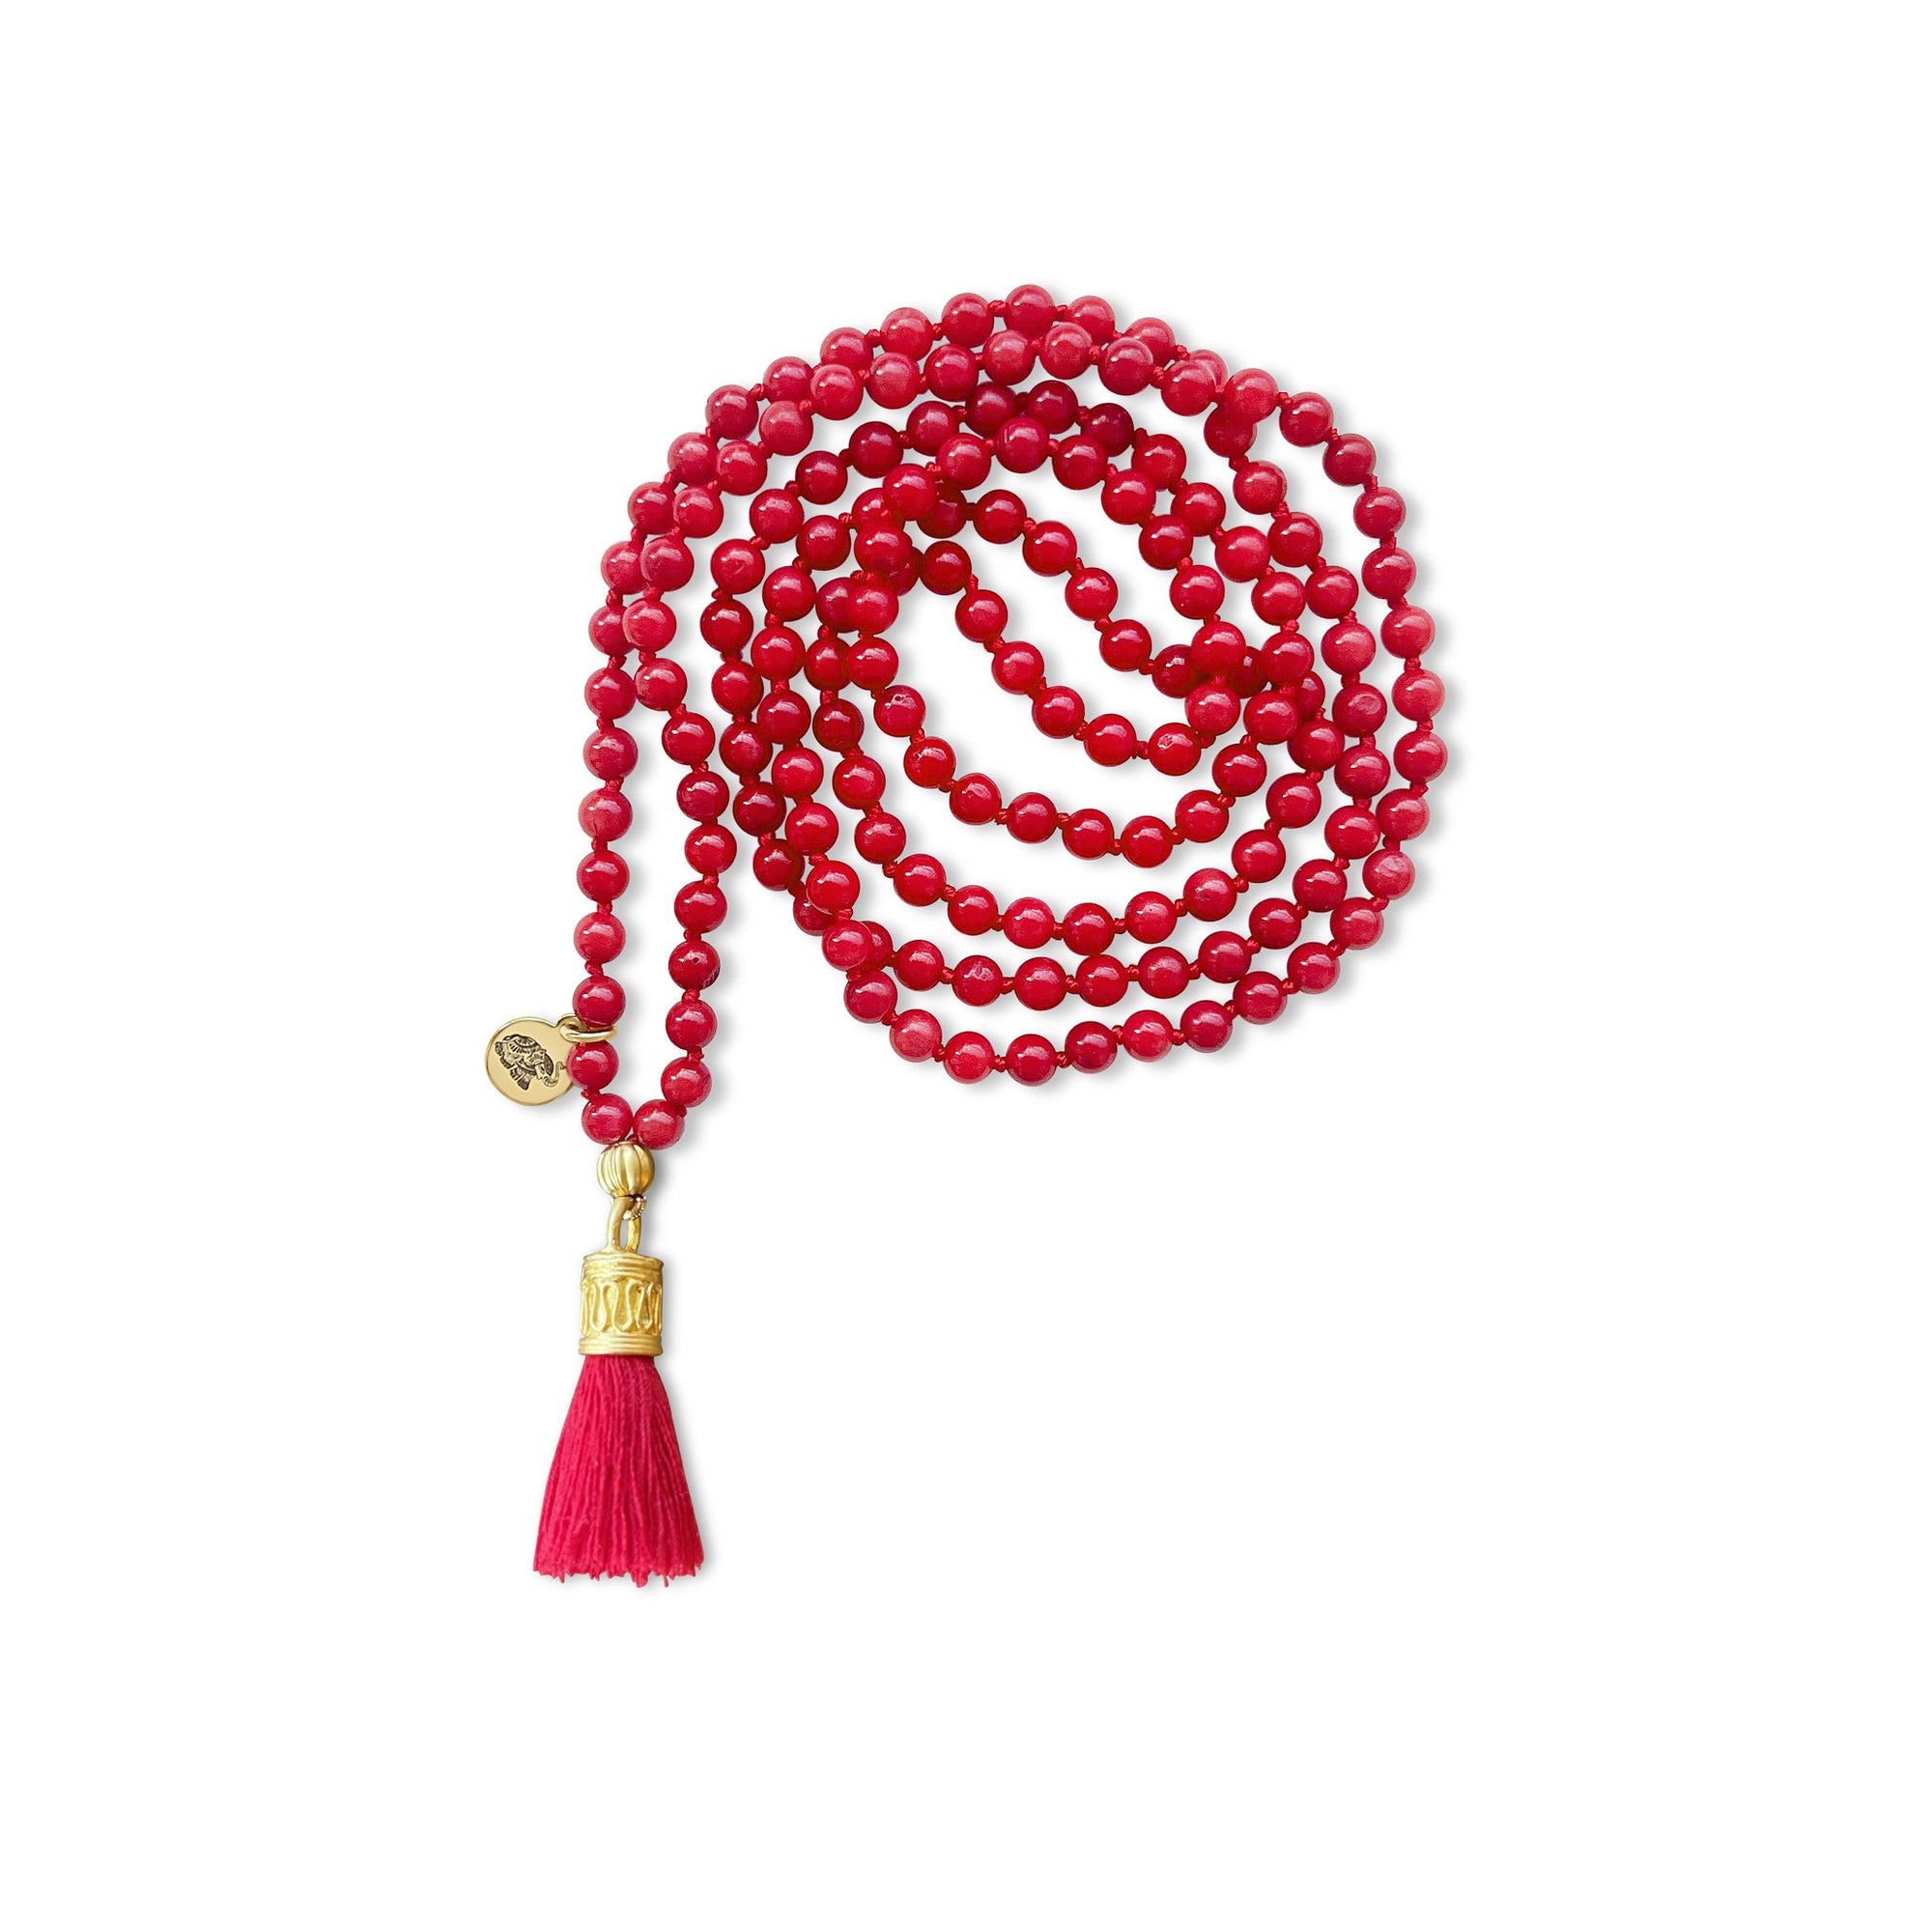 Red Coral Mala Prayer Bead Necklace